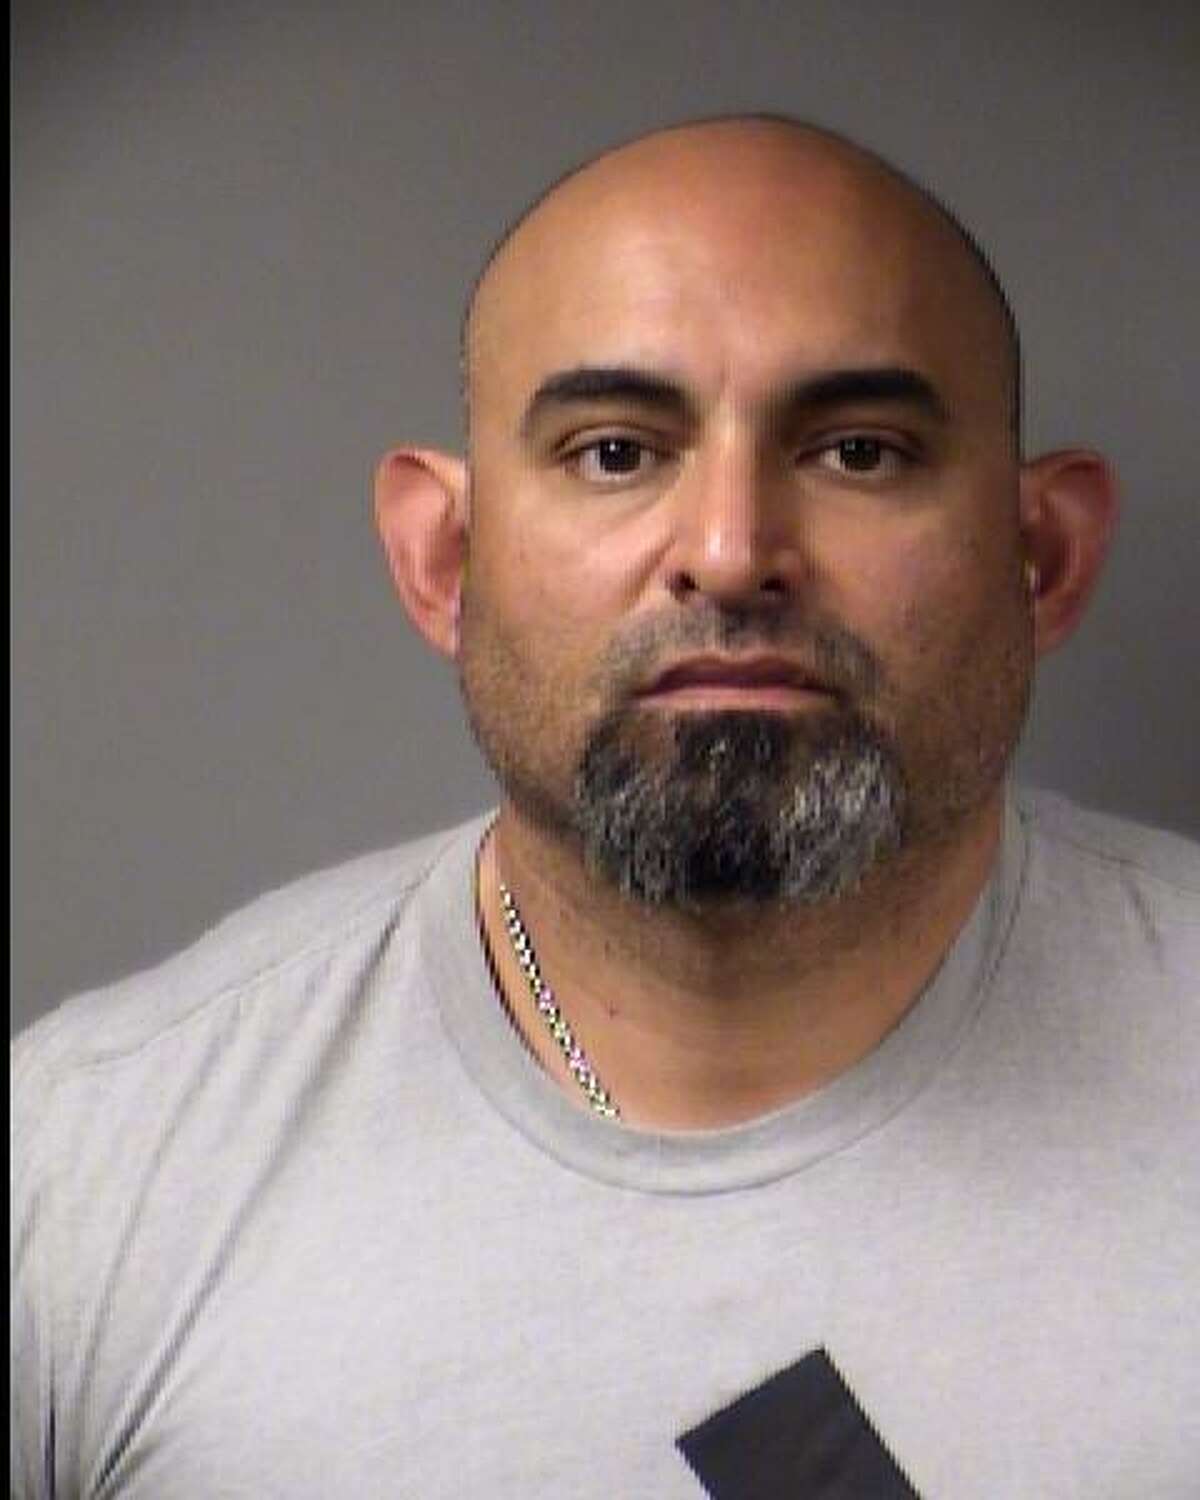 Former Precinct 2 Constable Captain Marc Duane Garcia, 40, is pictured in a mugshot on Jan. 23, 2020. Garcia, who worked for embattled former Constable Michelle Barrientes Vela, was indicted on one charge of aggravated perjury and three counts of official oppression.